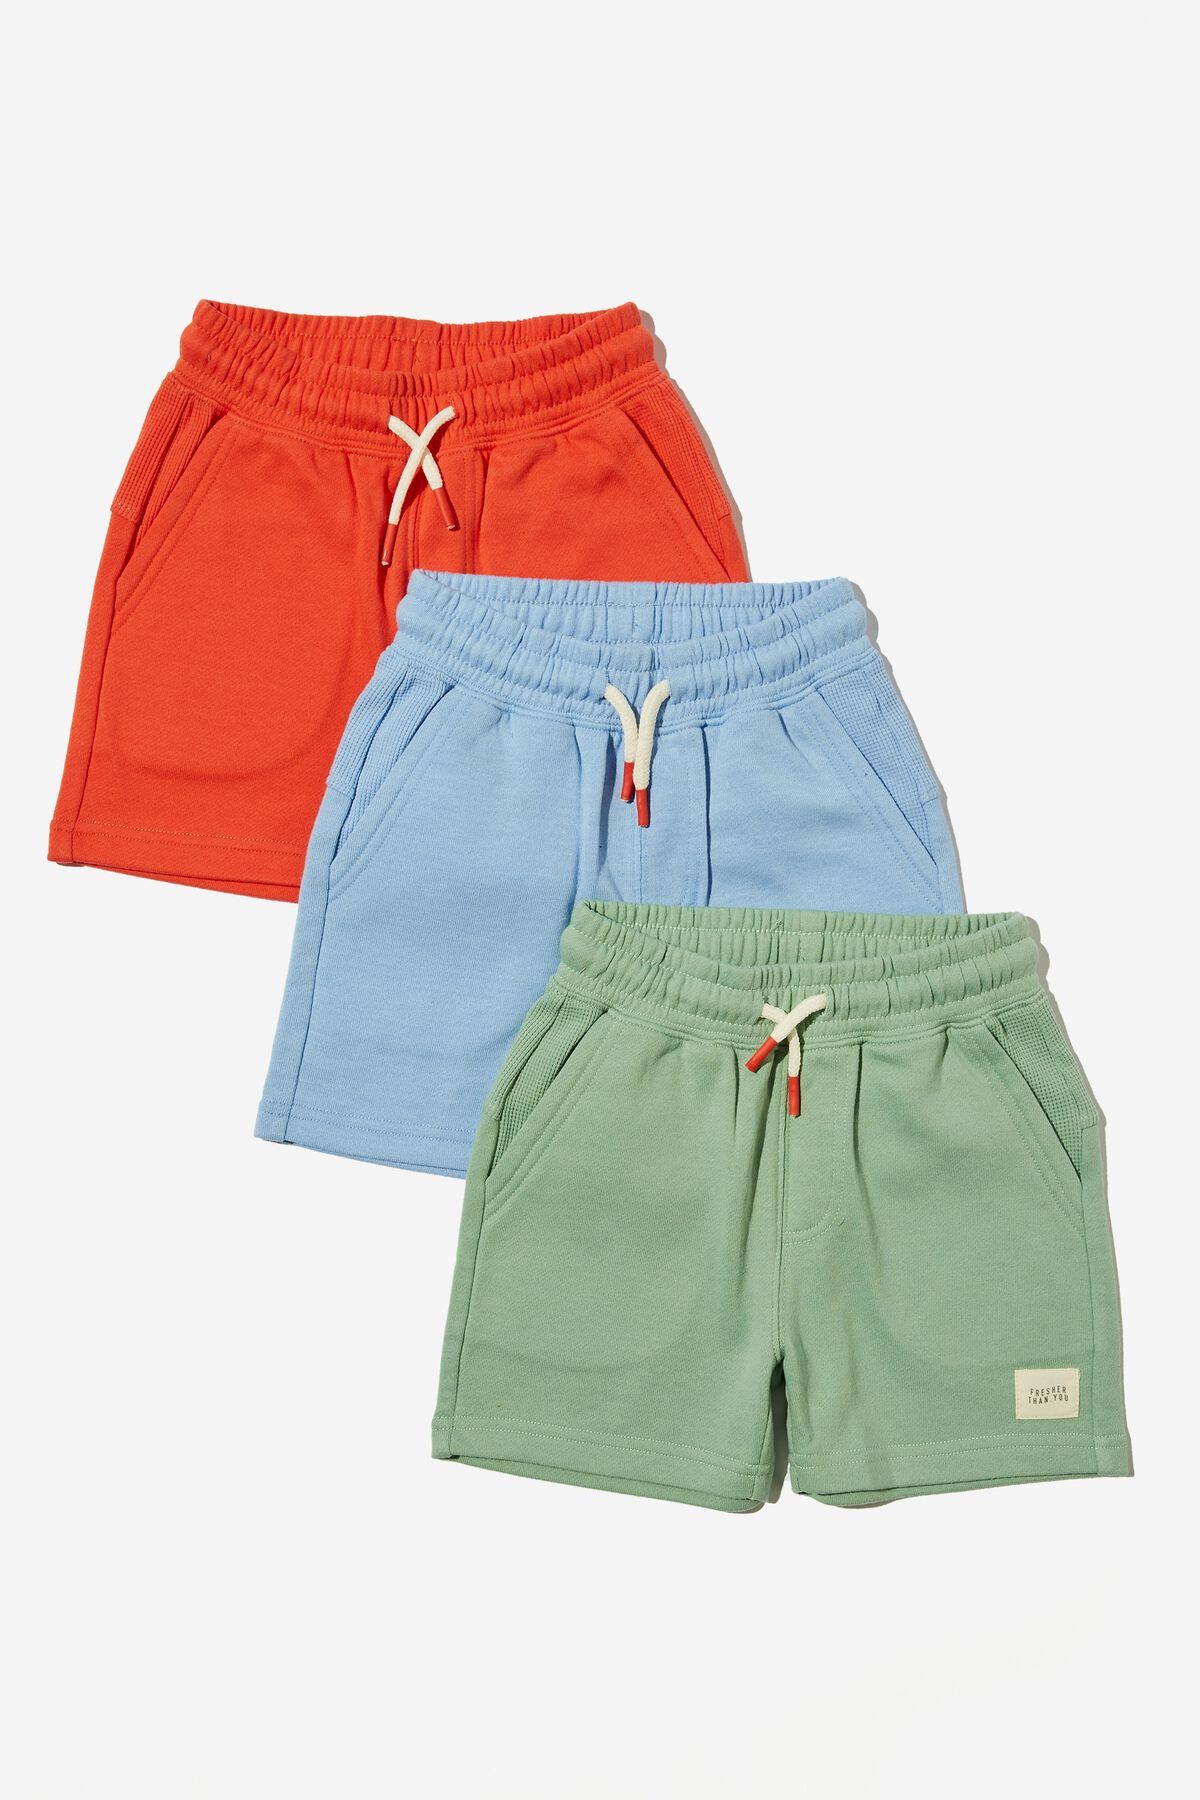 Multipack Henry Short Three Pack | Cotton On (ANZ)